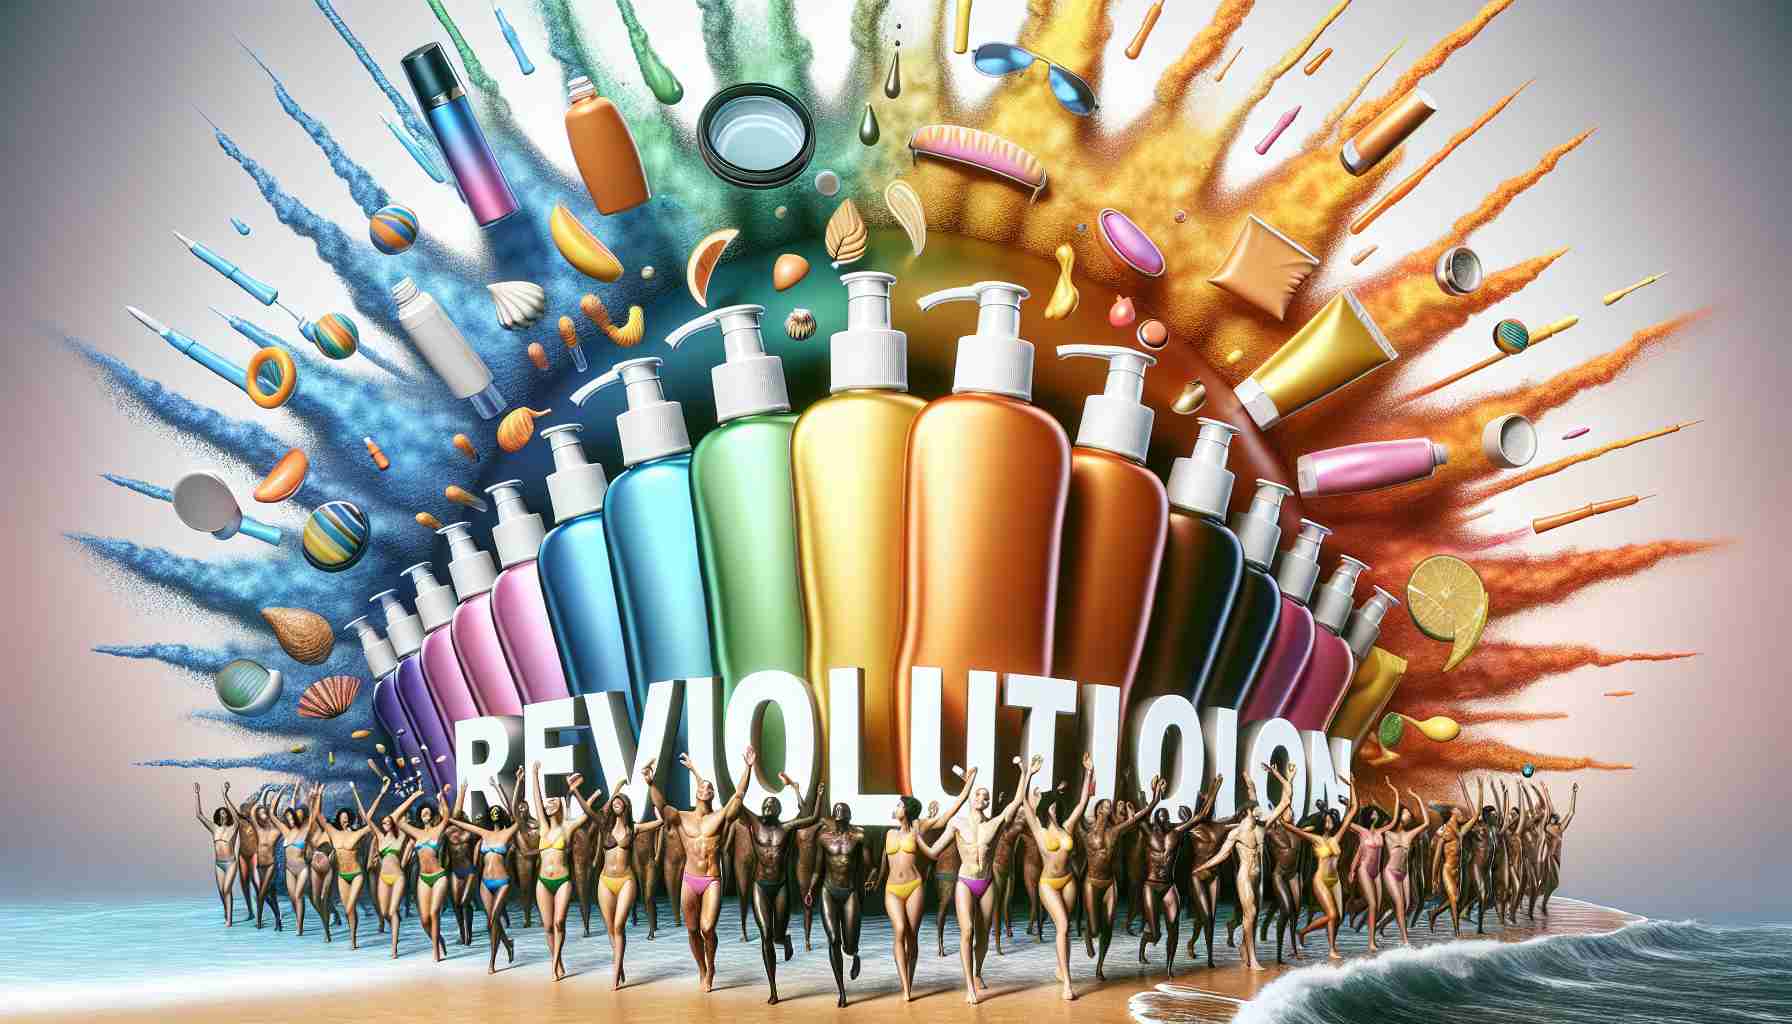 An ultra high definition, realistic illustration of a new approach to sun protection symbolizing revolution in skincare. Imagine a variety of sunscreens, each packaged in innovative, user-friendly containers. They come in a rainbow of colors representing different levels of protection. Alongside is a diverse group of people of varying descents such as Caucasian, Hispanic, Black, Middle-Eastern, and South Asian, confidently applying these new products onto their skin under a giant symbol of the sun, demonstrating the accessibility and inclusivity of this skincare revolution.